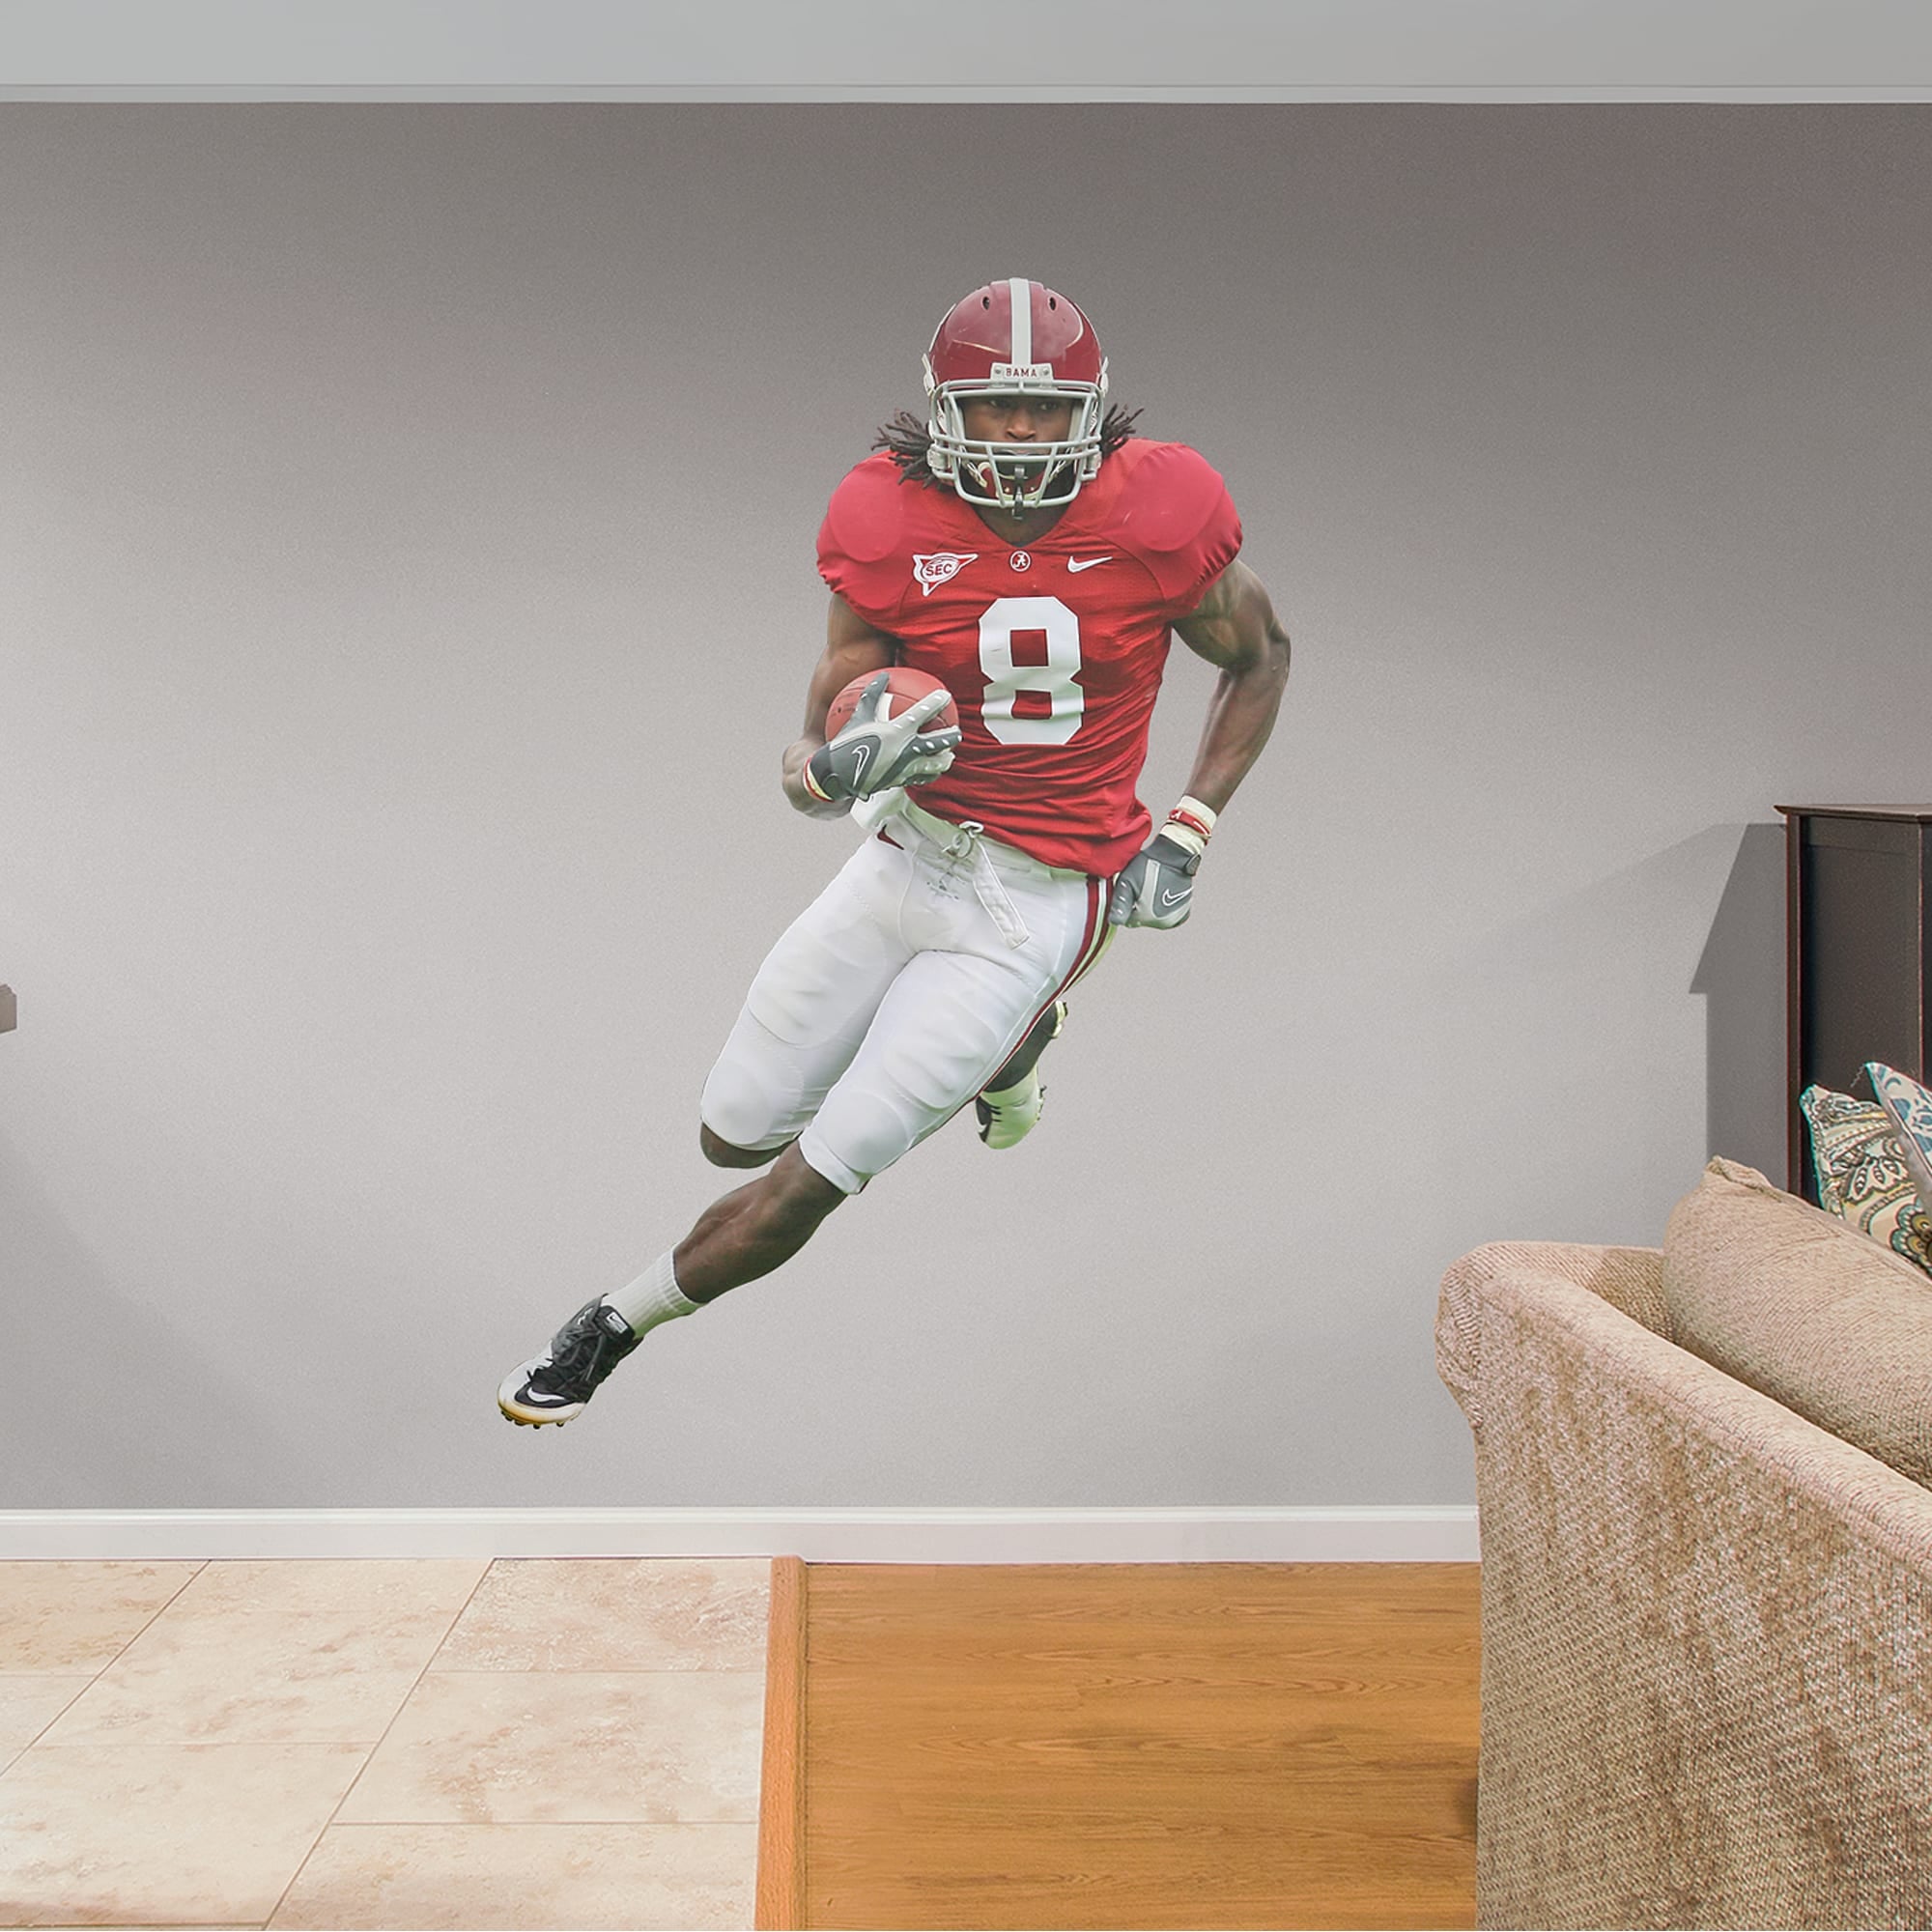 Julio Jones for Alabama Crimson Tide: Alabama - Officially Licensed Removable Wall Decal 49.0"W x 71.0"H by Fathead | Vinyl